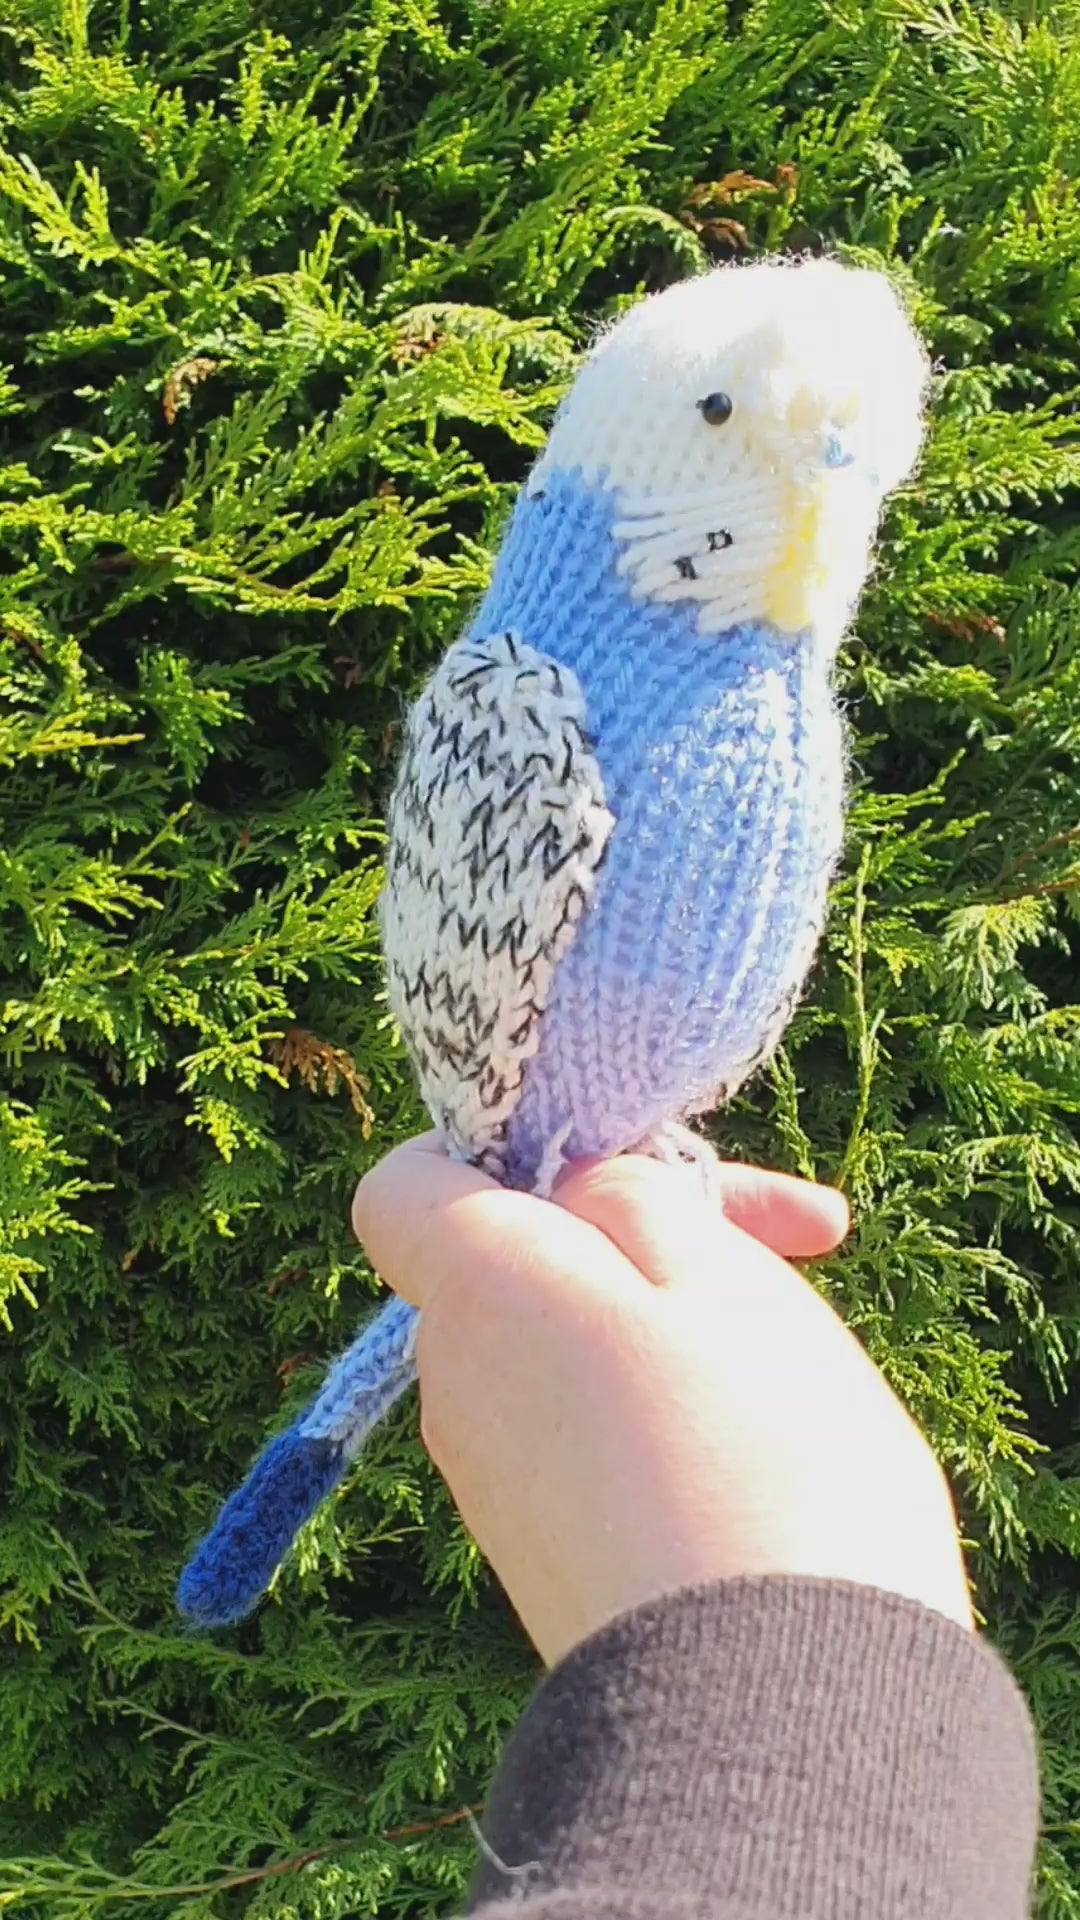 a knitted blue budgerigar designed by Nicky Stewart from a knitting kit